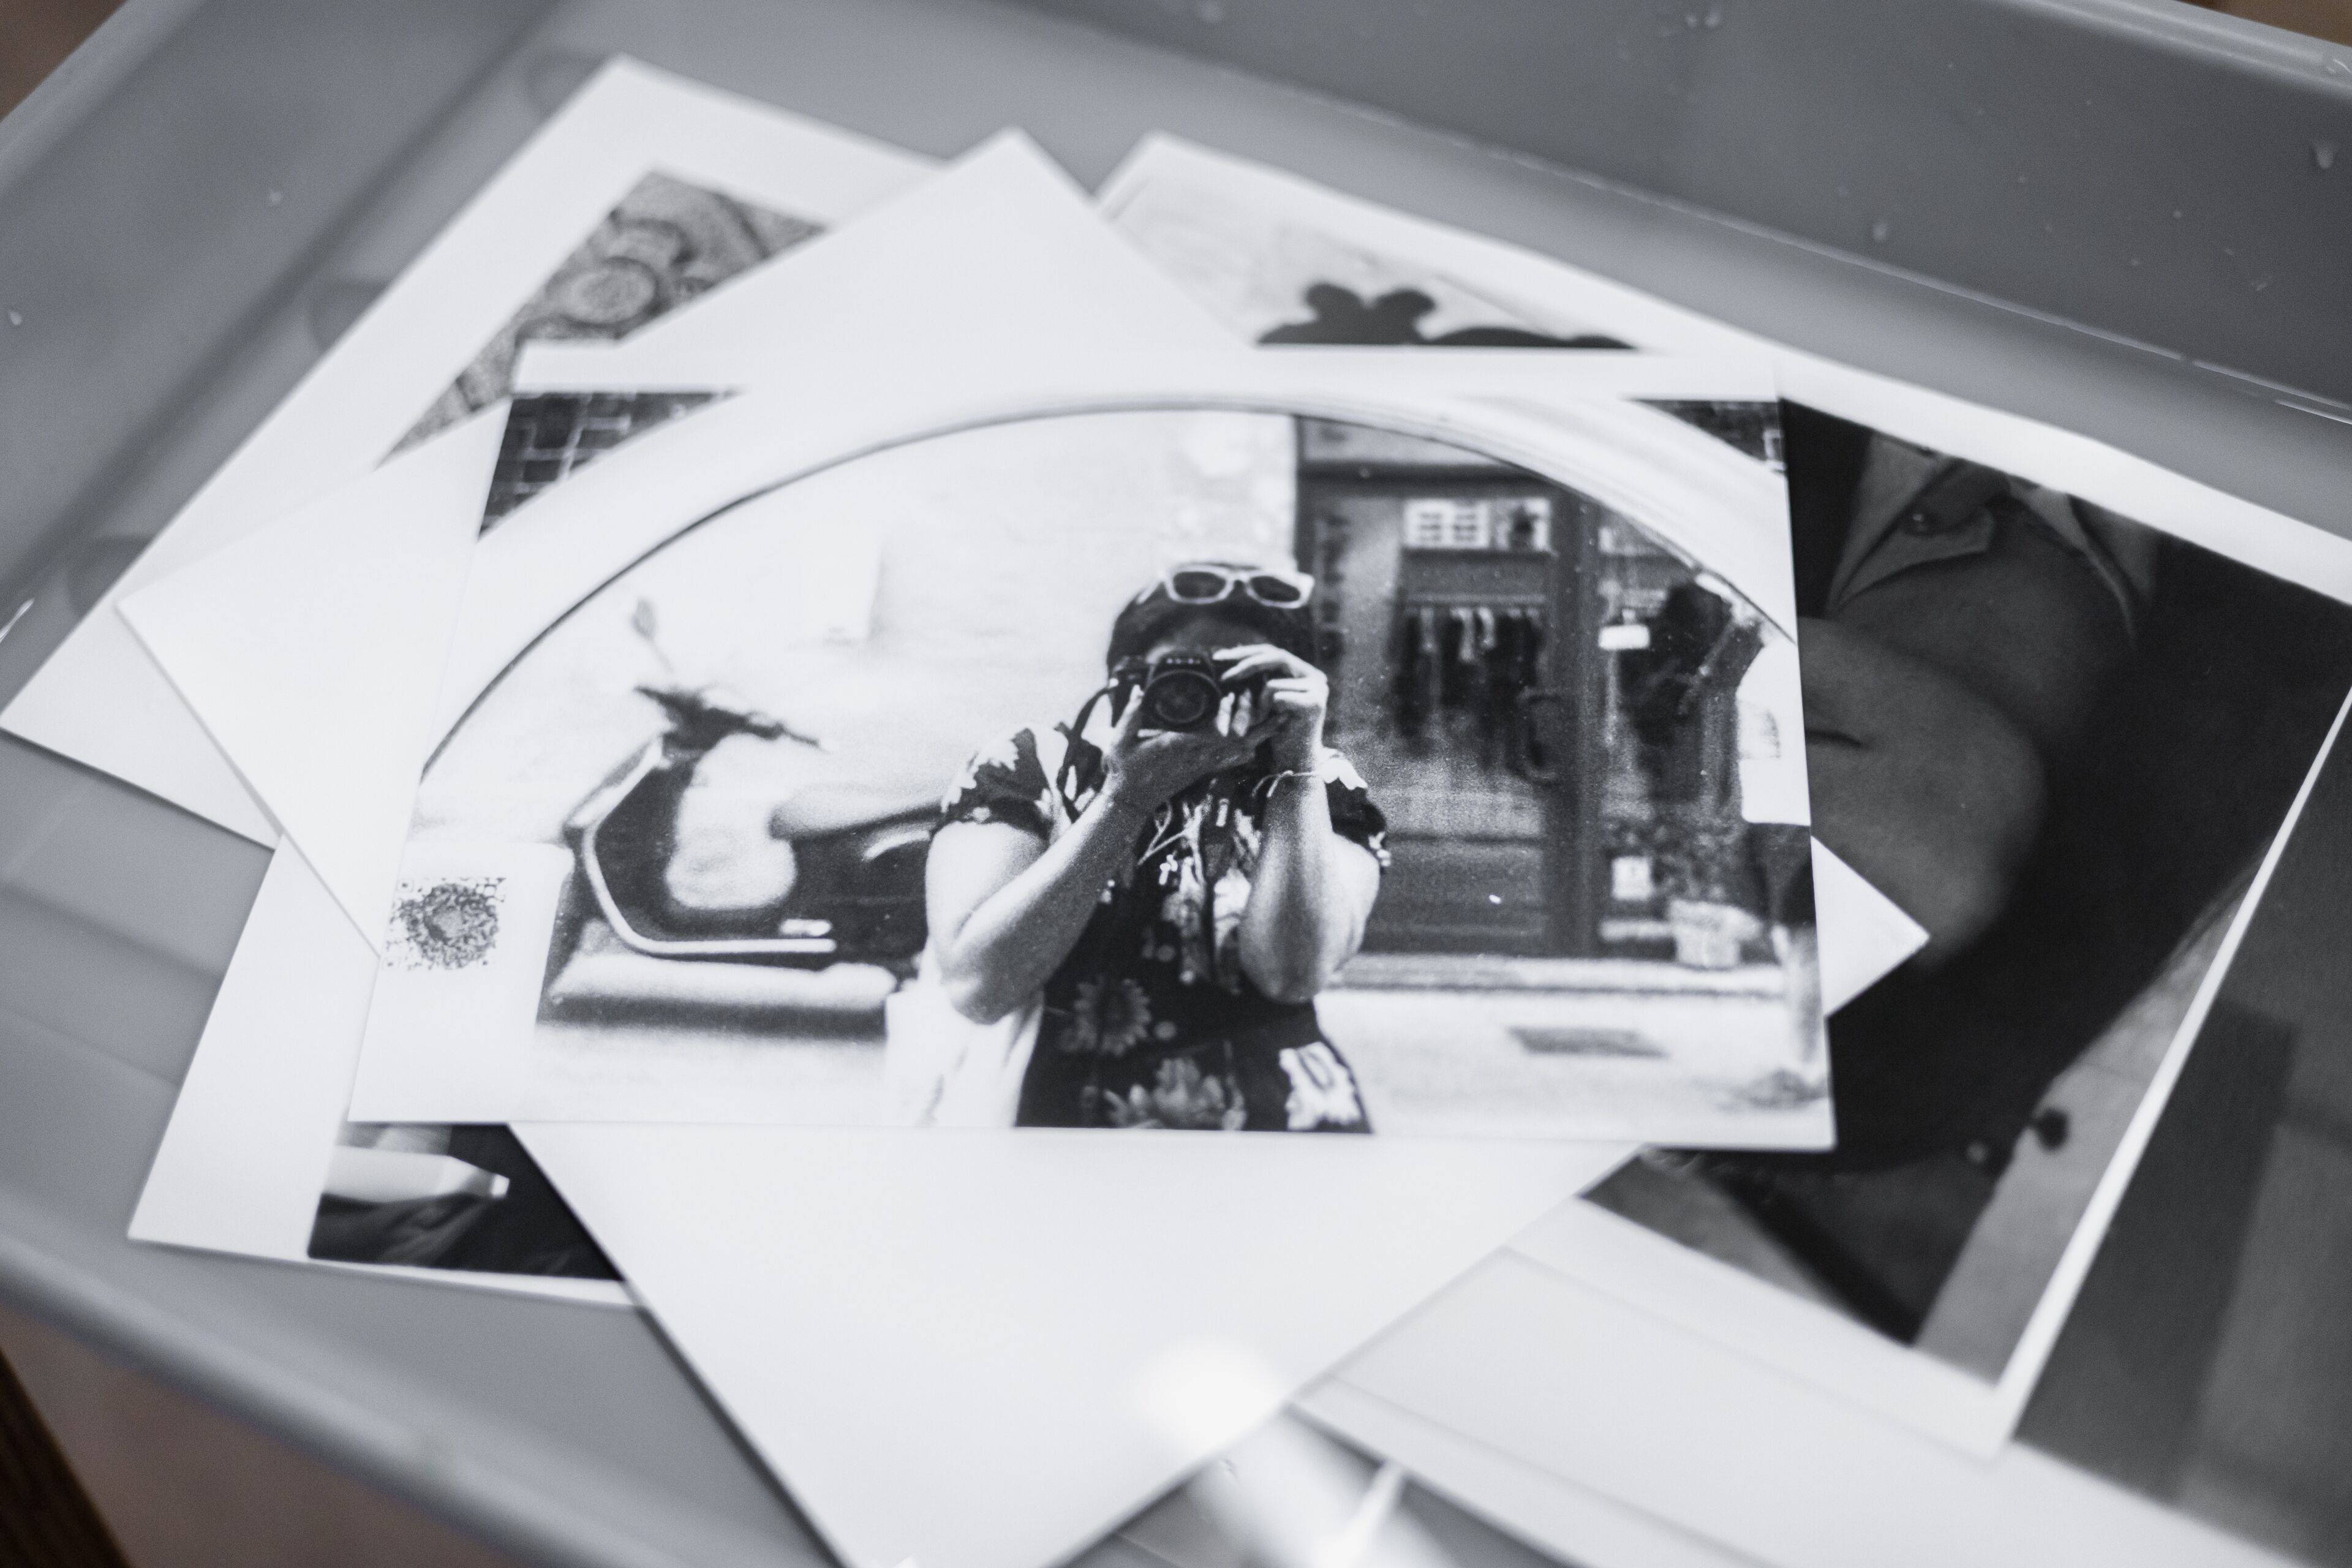 A collection of black and white photos, with a central image capturing the photographer's reflection in a mirror.